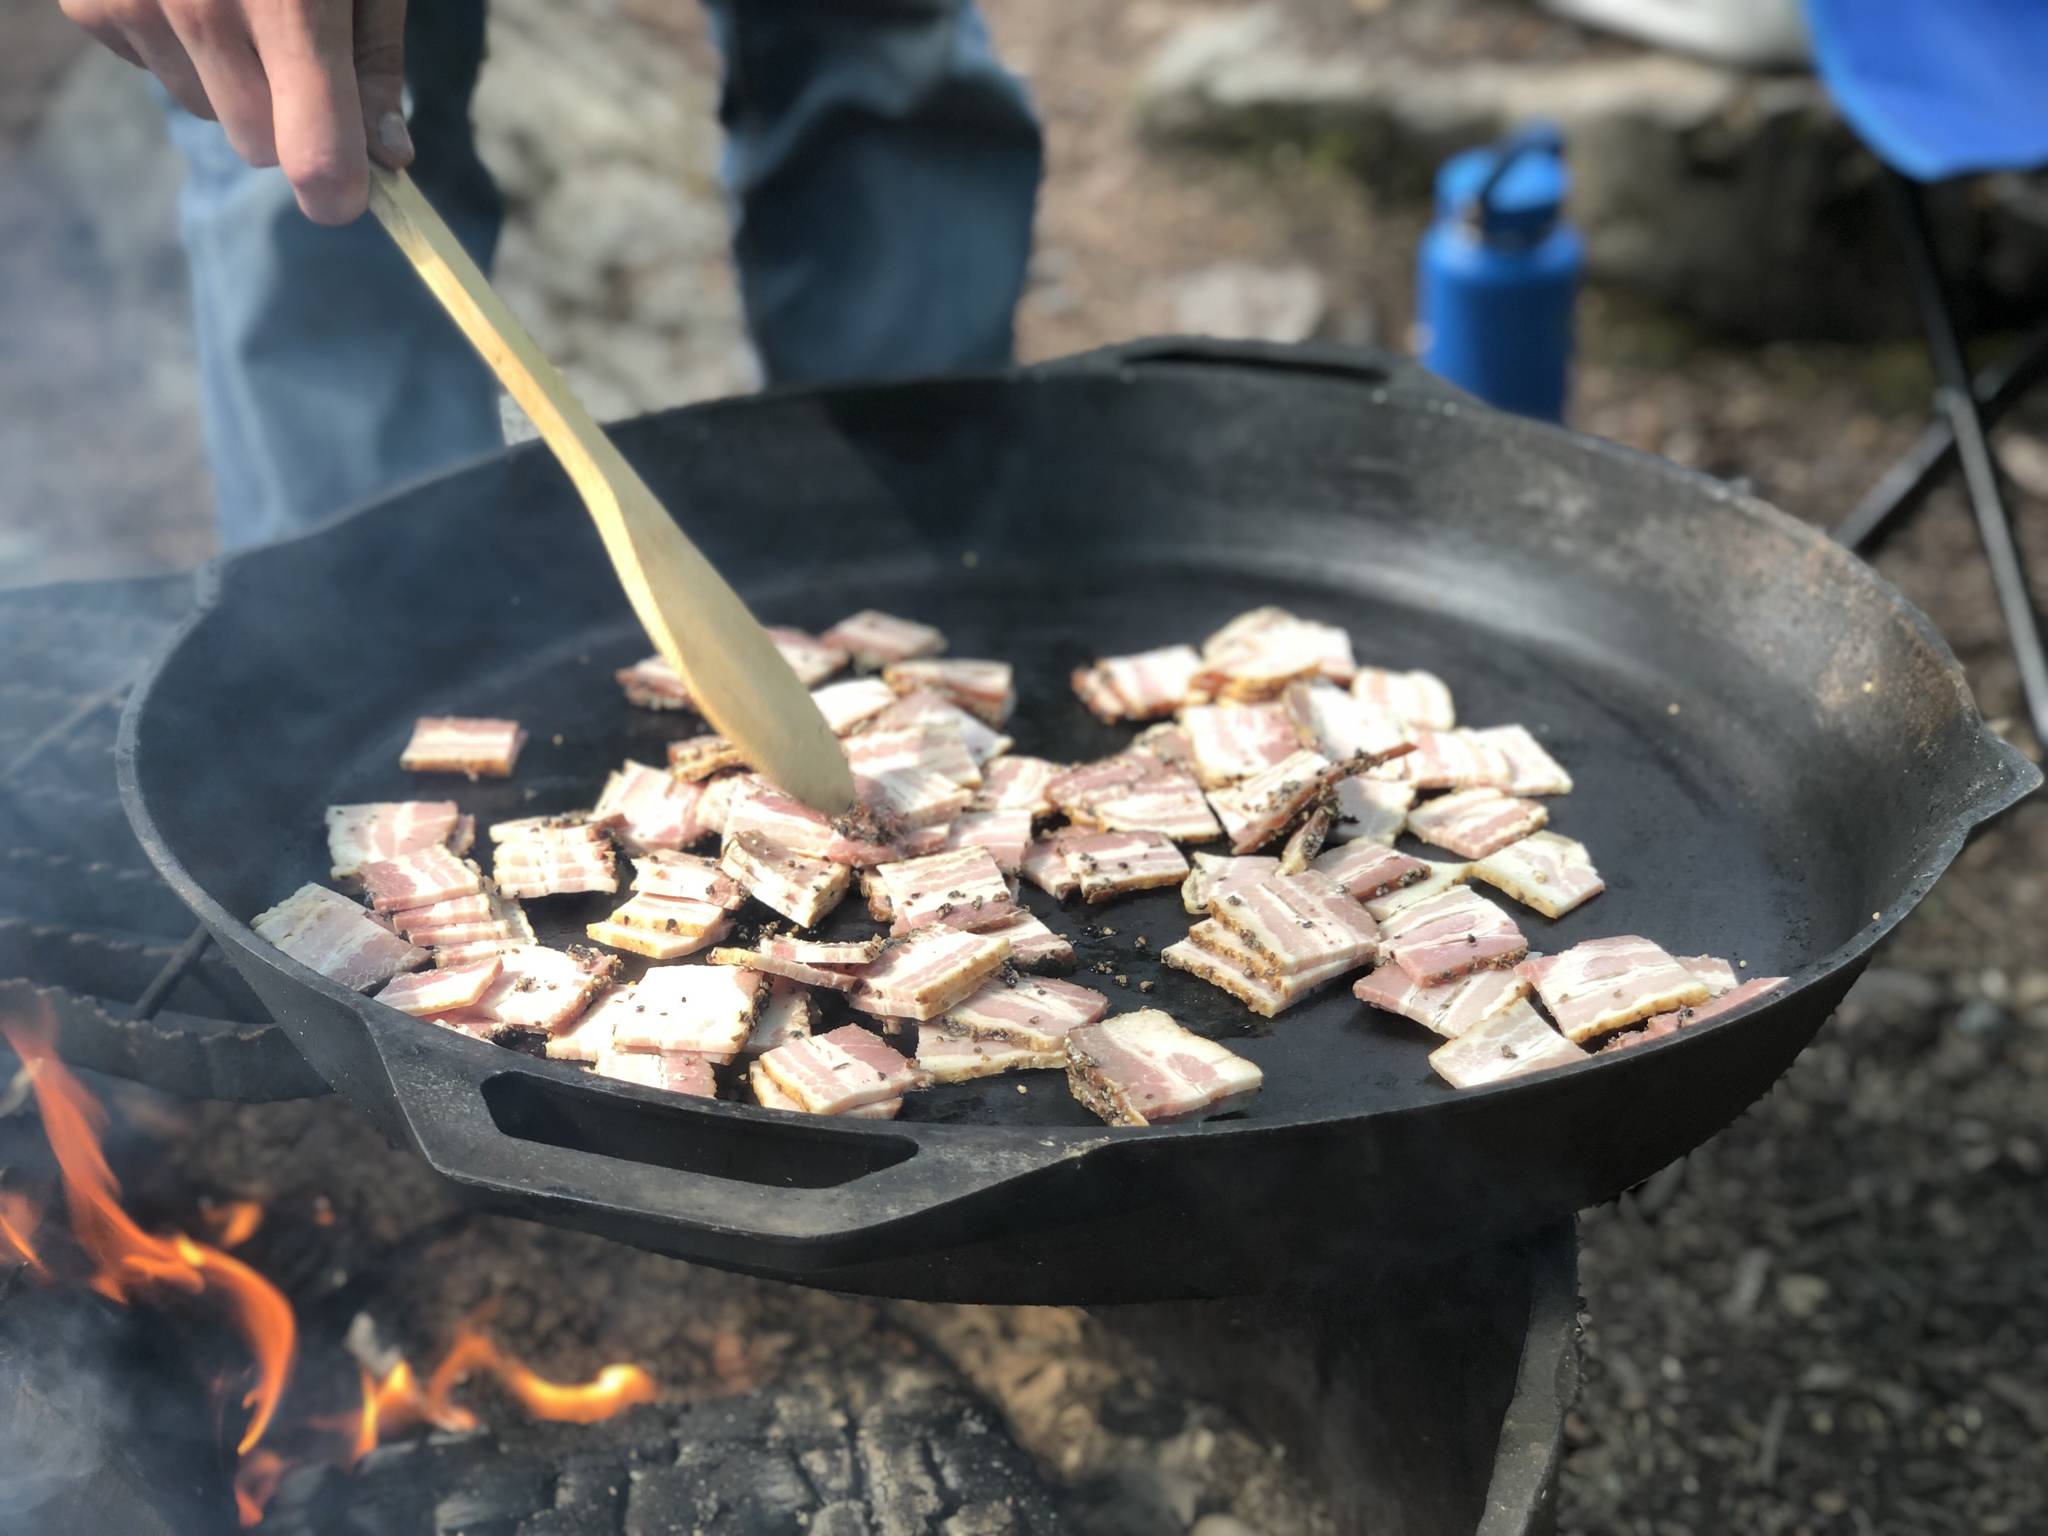 Bacon is prepared on a fire pit, June 19, in the Copper River Valley. (Photo by Victoria Petersen/Peninsula Clarion)